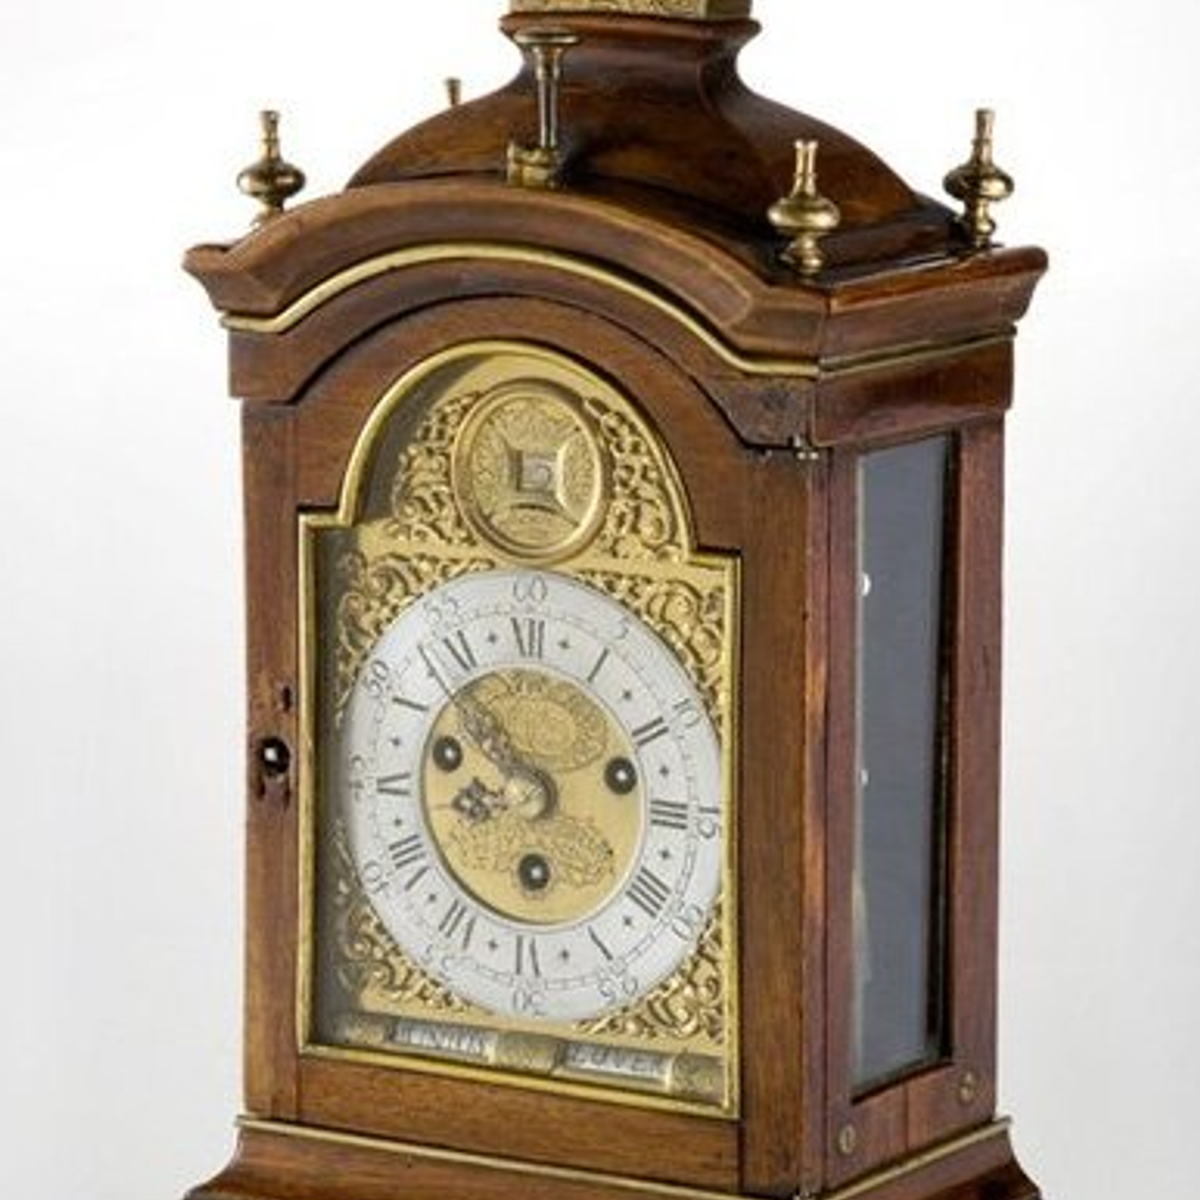 Watch and Clock Museum, Denmark